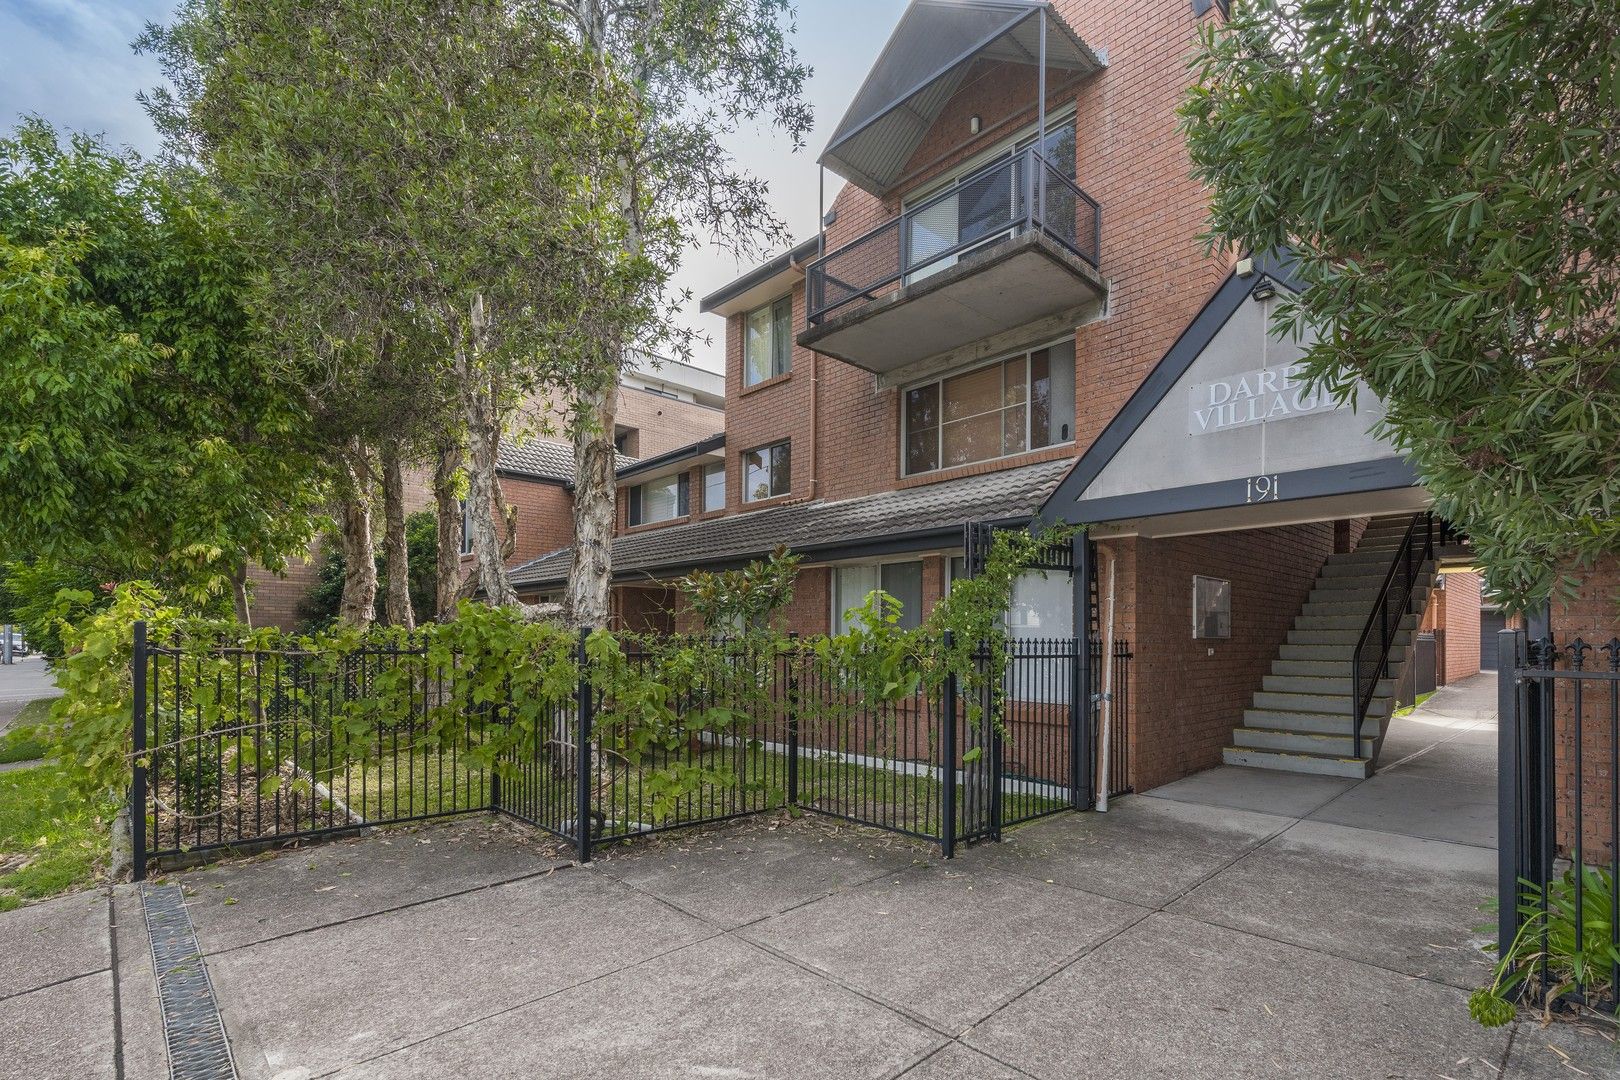 3/191 Darby Street, Cooks Hill NSW 2300, Image 0